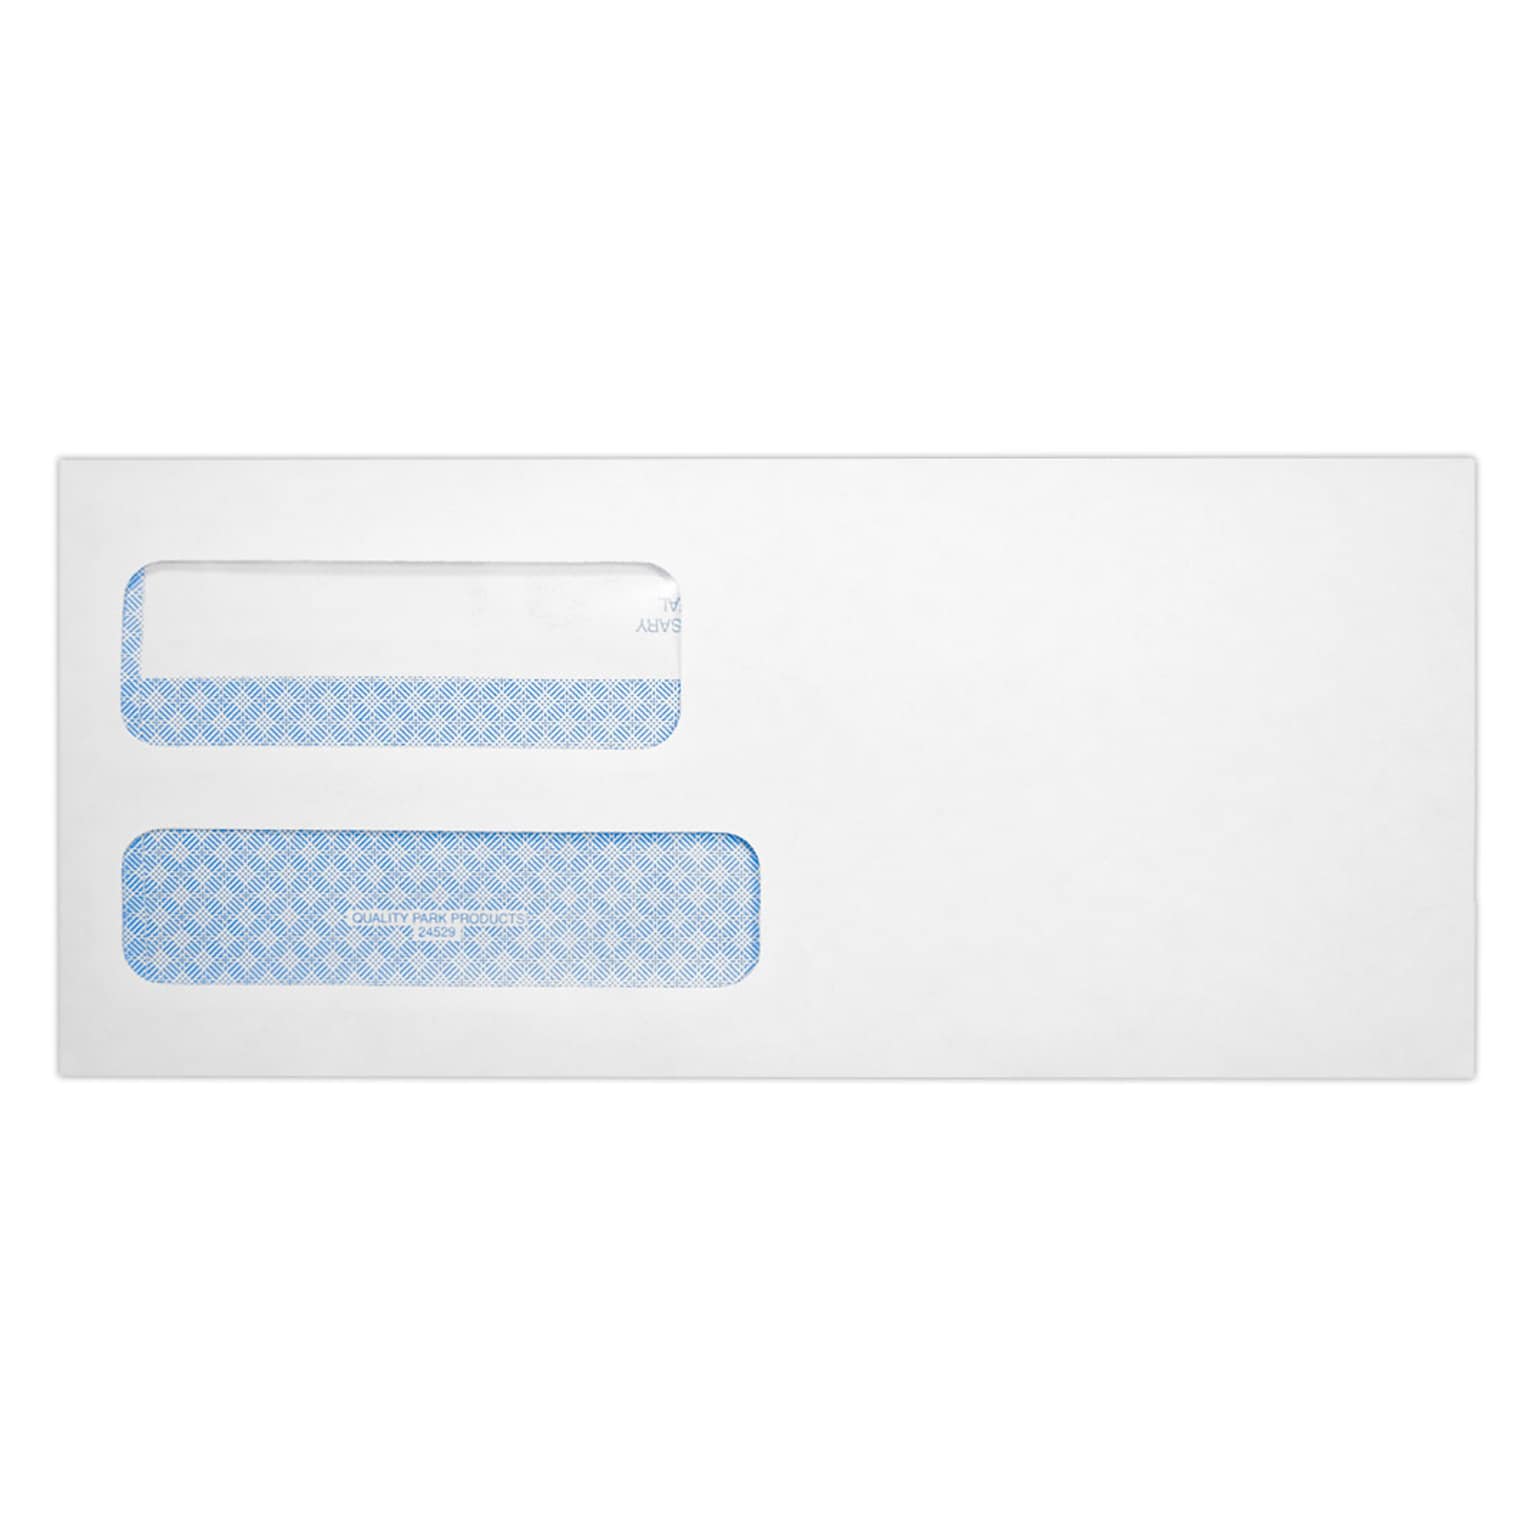 Quality Park Redi-Seal Self Seal Security Tinted #9 Double Window Envelope, 3 7/8 x 8 7/8, White Wove, 50/Pack (24529-50)